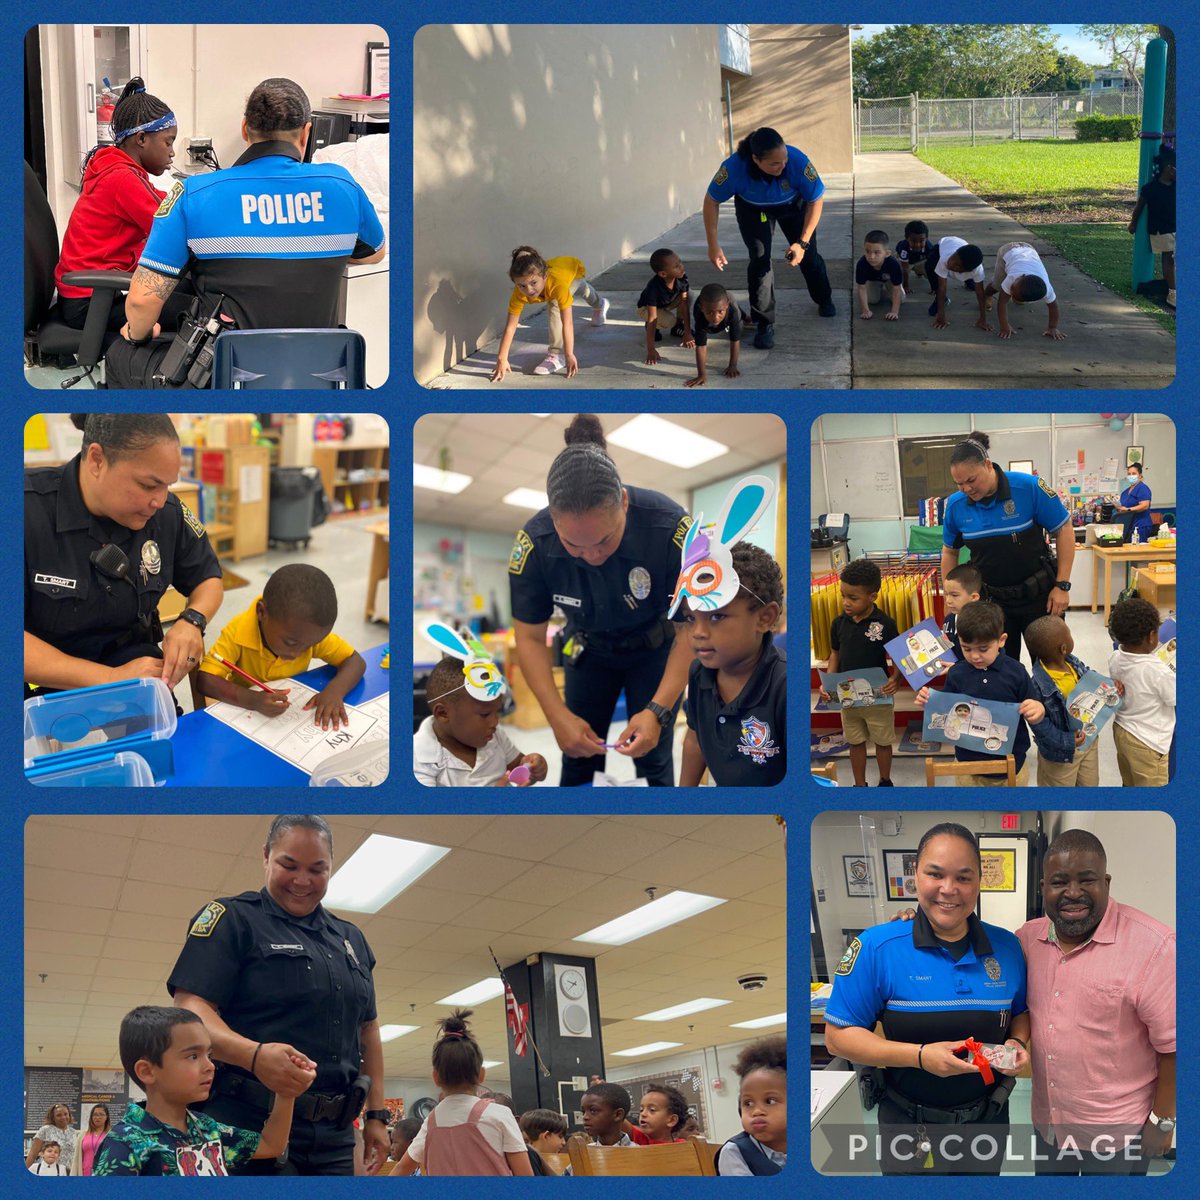 Happy #nationalpoliceweek to our very own Officer T. Smart! Always ON DUTY #protectingourfuture 🚔💙We are grateful for you! 

#BackTheBlue #PoliceWeek2023 #DWAC
@MDCPSSouth @MDSPD @MDCPS @robinson81966